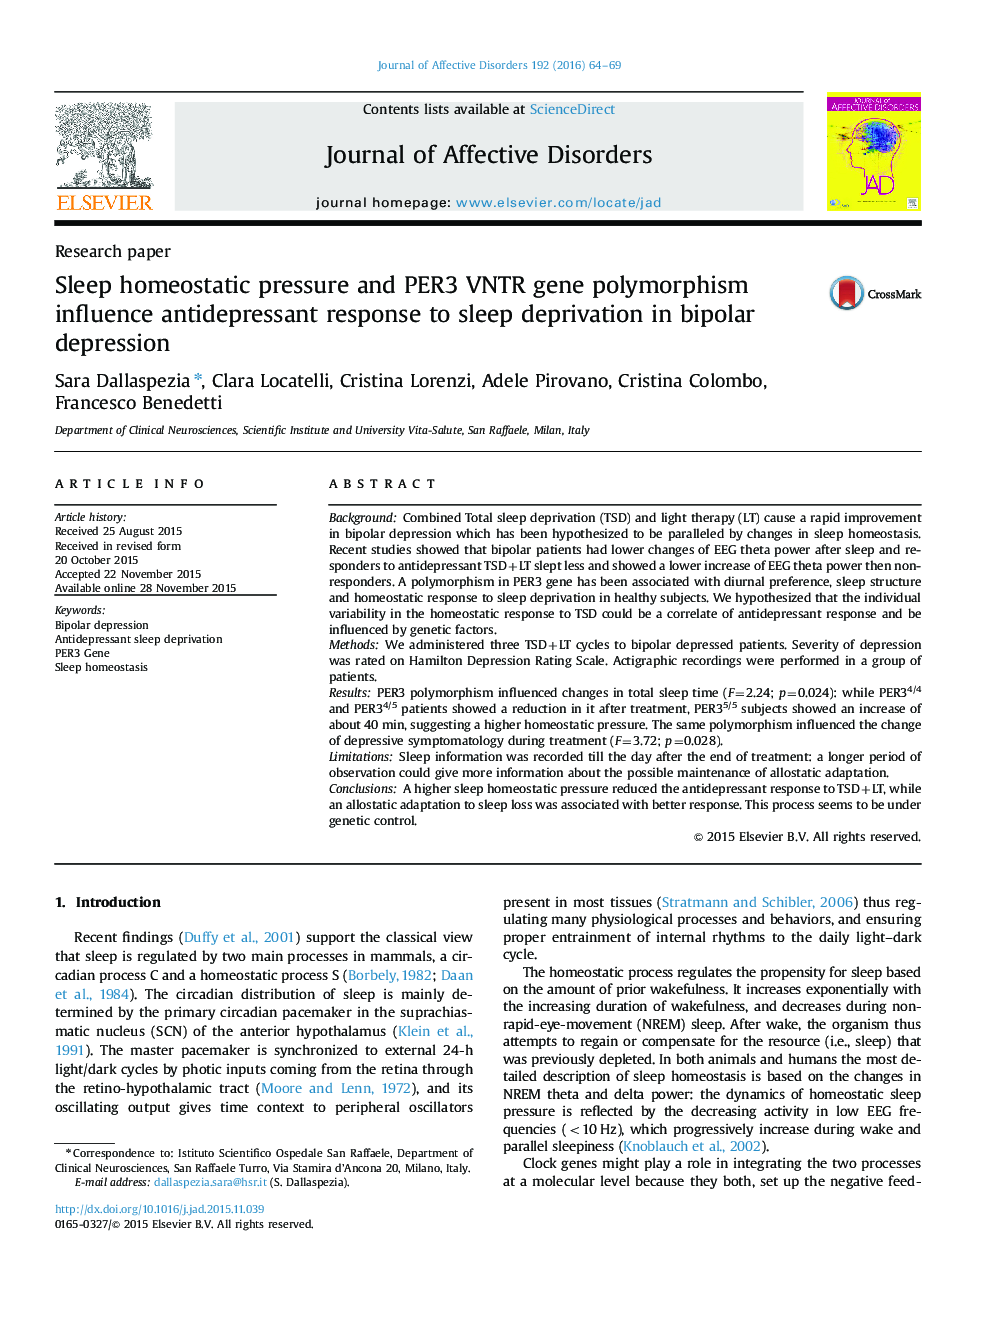 Research paperSleep homeostatic pressure and PER3 VNTR gene polymorphism influence antidepressant response to sleep deprivation in bipolar depression